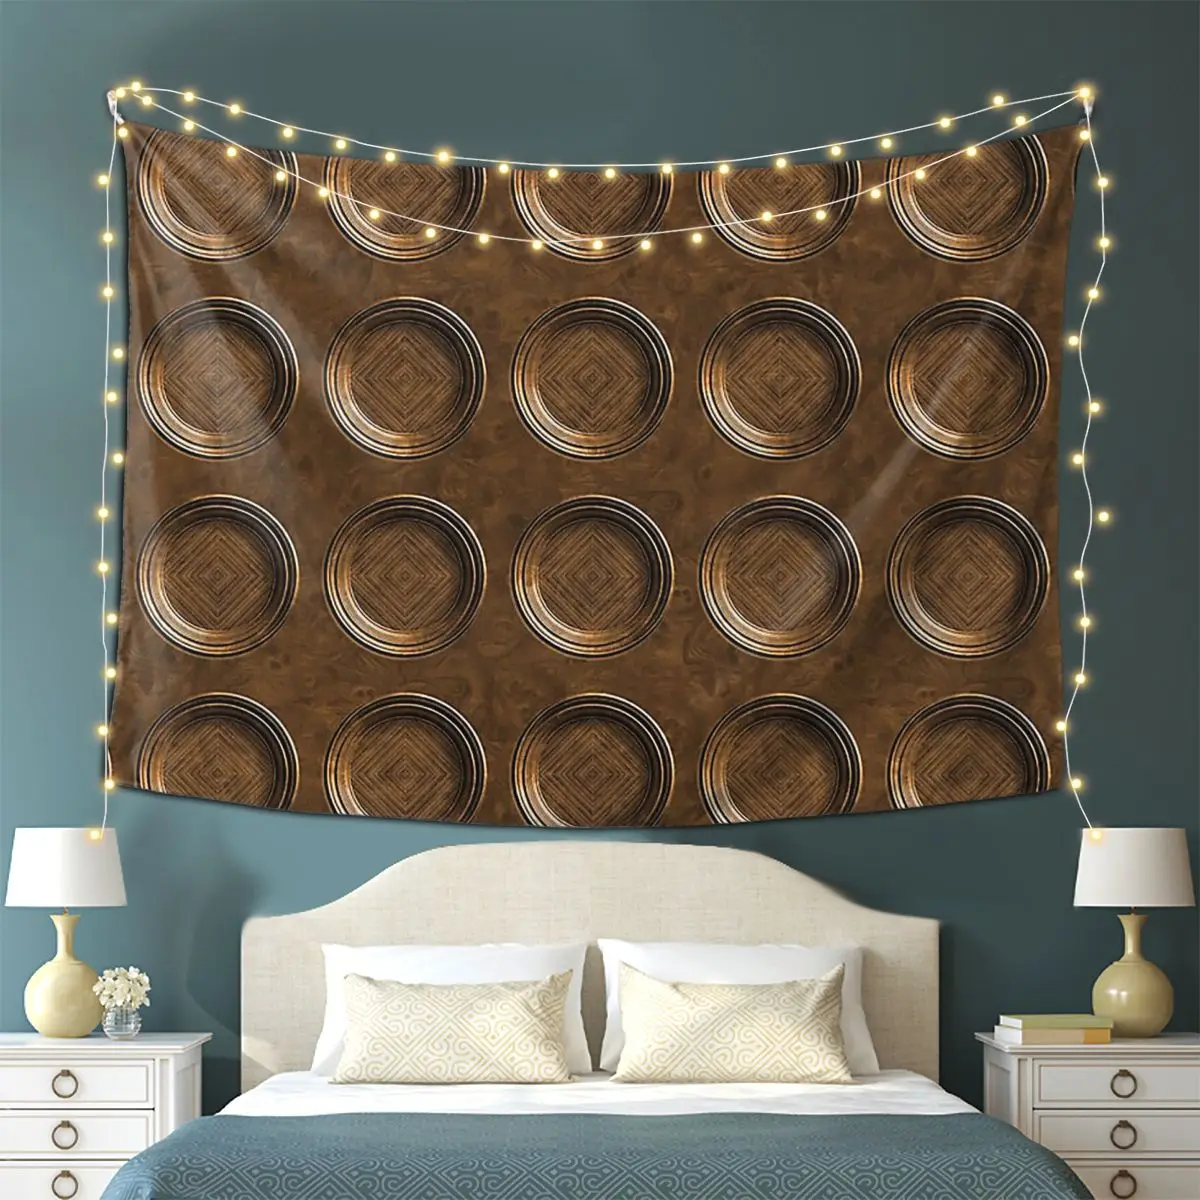 

WOODEN CIRCLES Aesthetic Home Decor Tapestry Art Wall Hanging Tapestries on the Wall for Living Room Bedroom Dorm Room